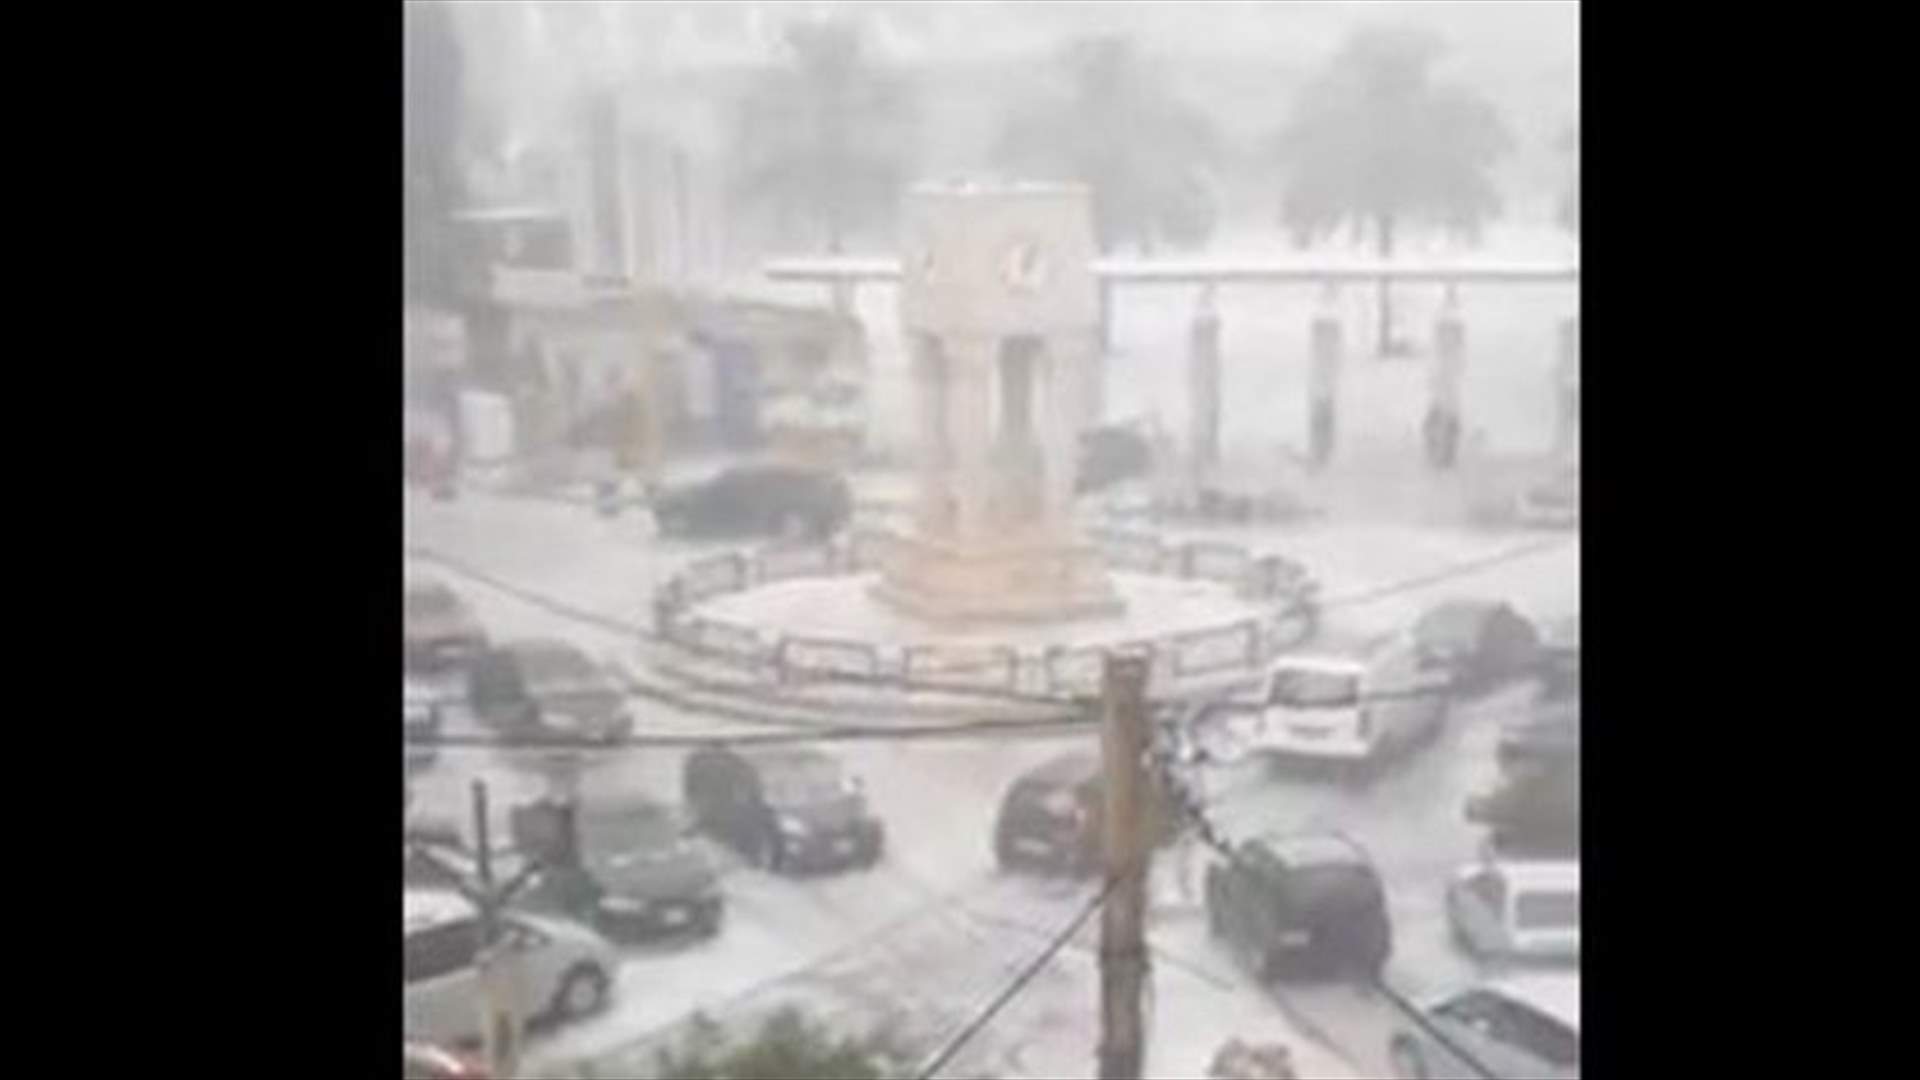 Roads and vehicles covered in hail in Beirut-[VIDEOS]